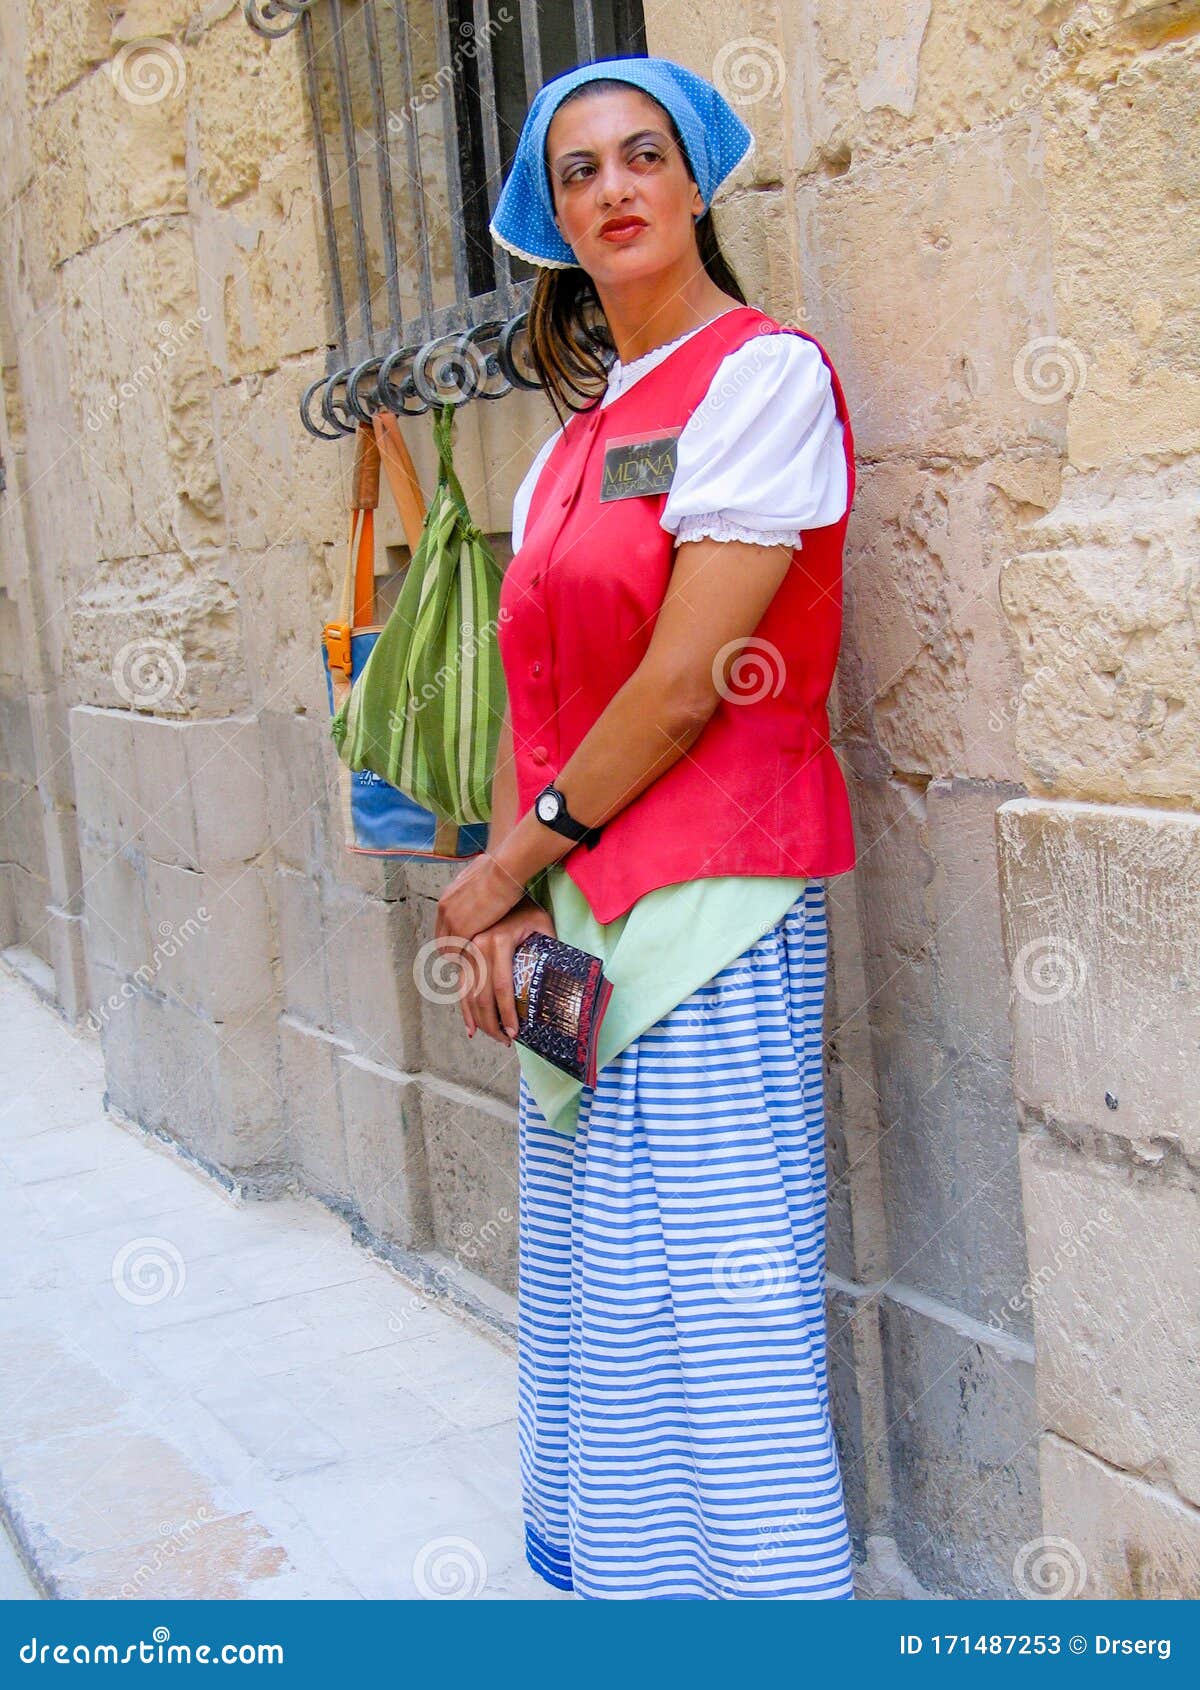 An Employee of the Historical Audio-visual Show Editorial Stock Photo - Image headscarf: 171487253